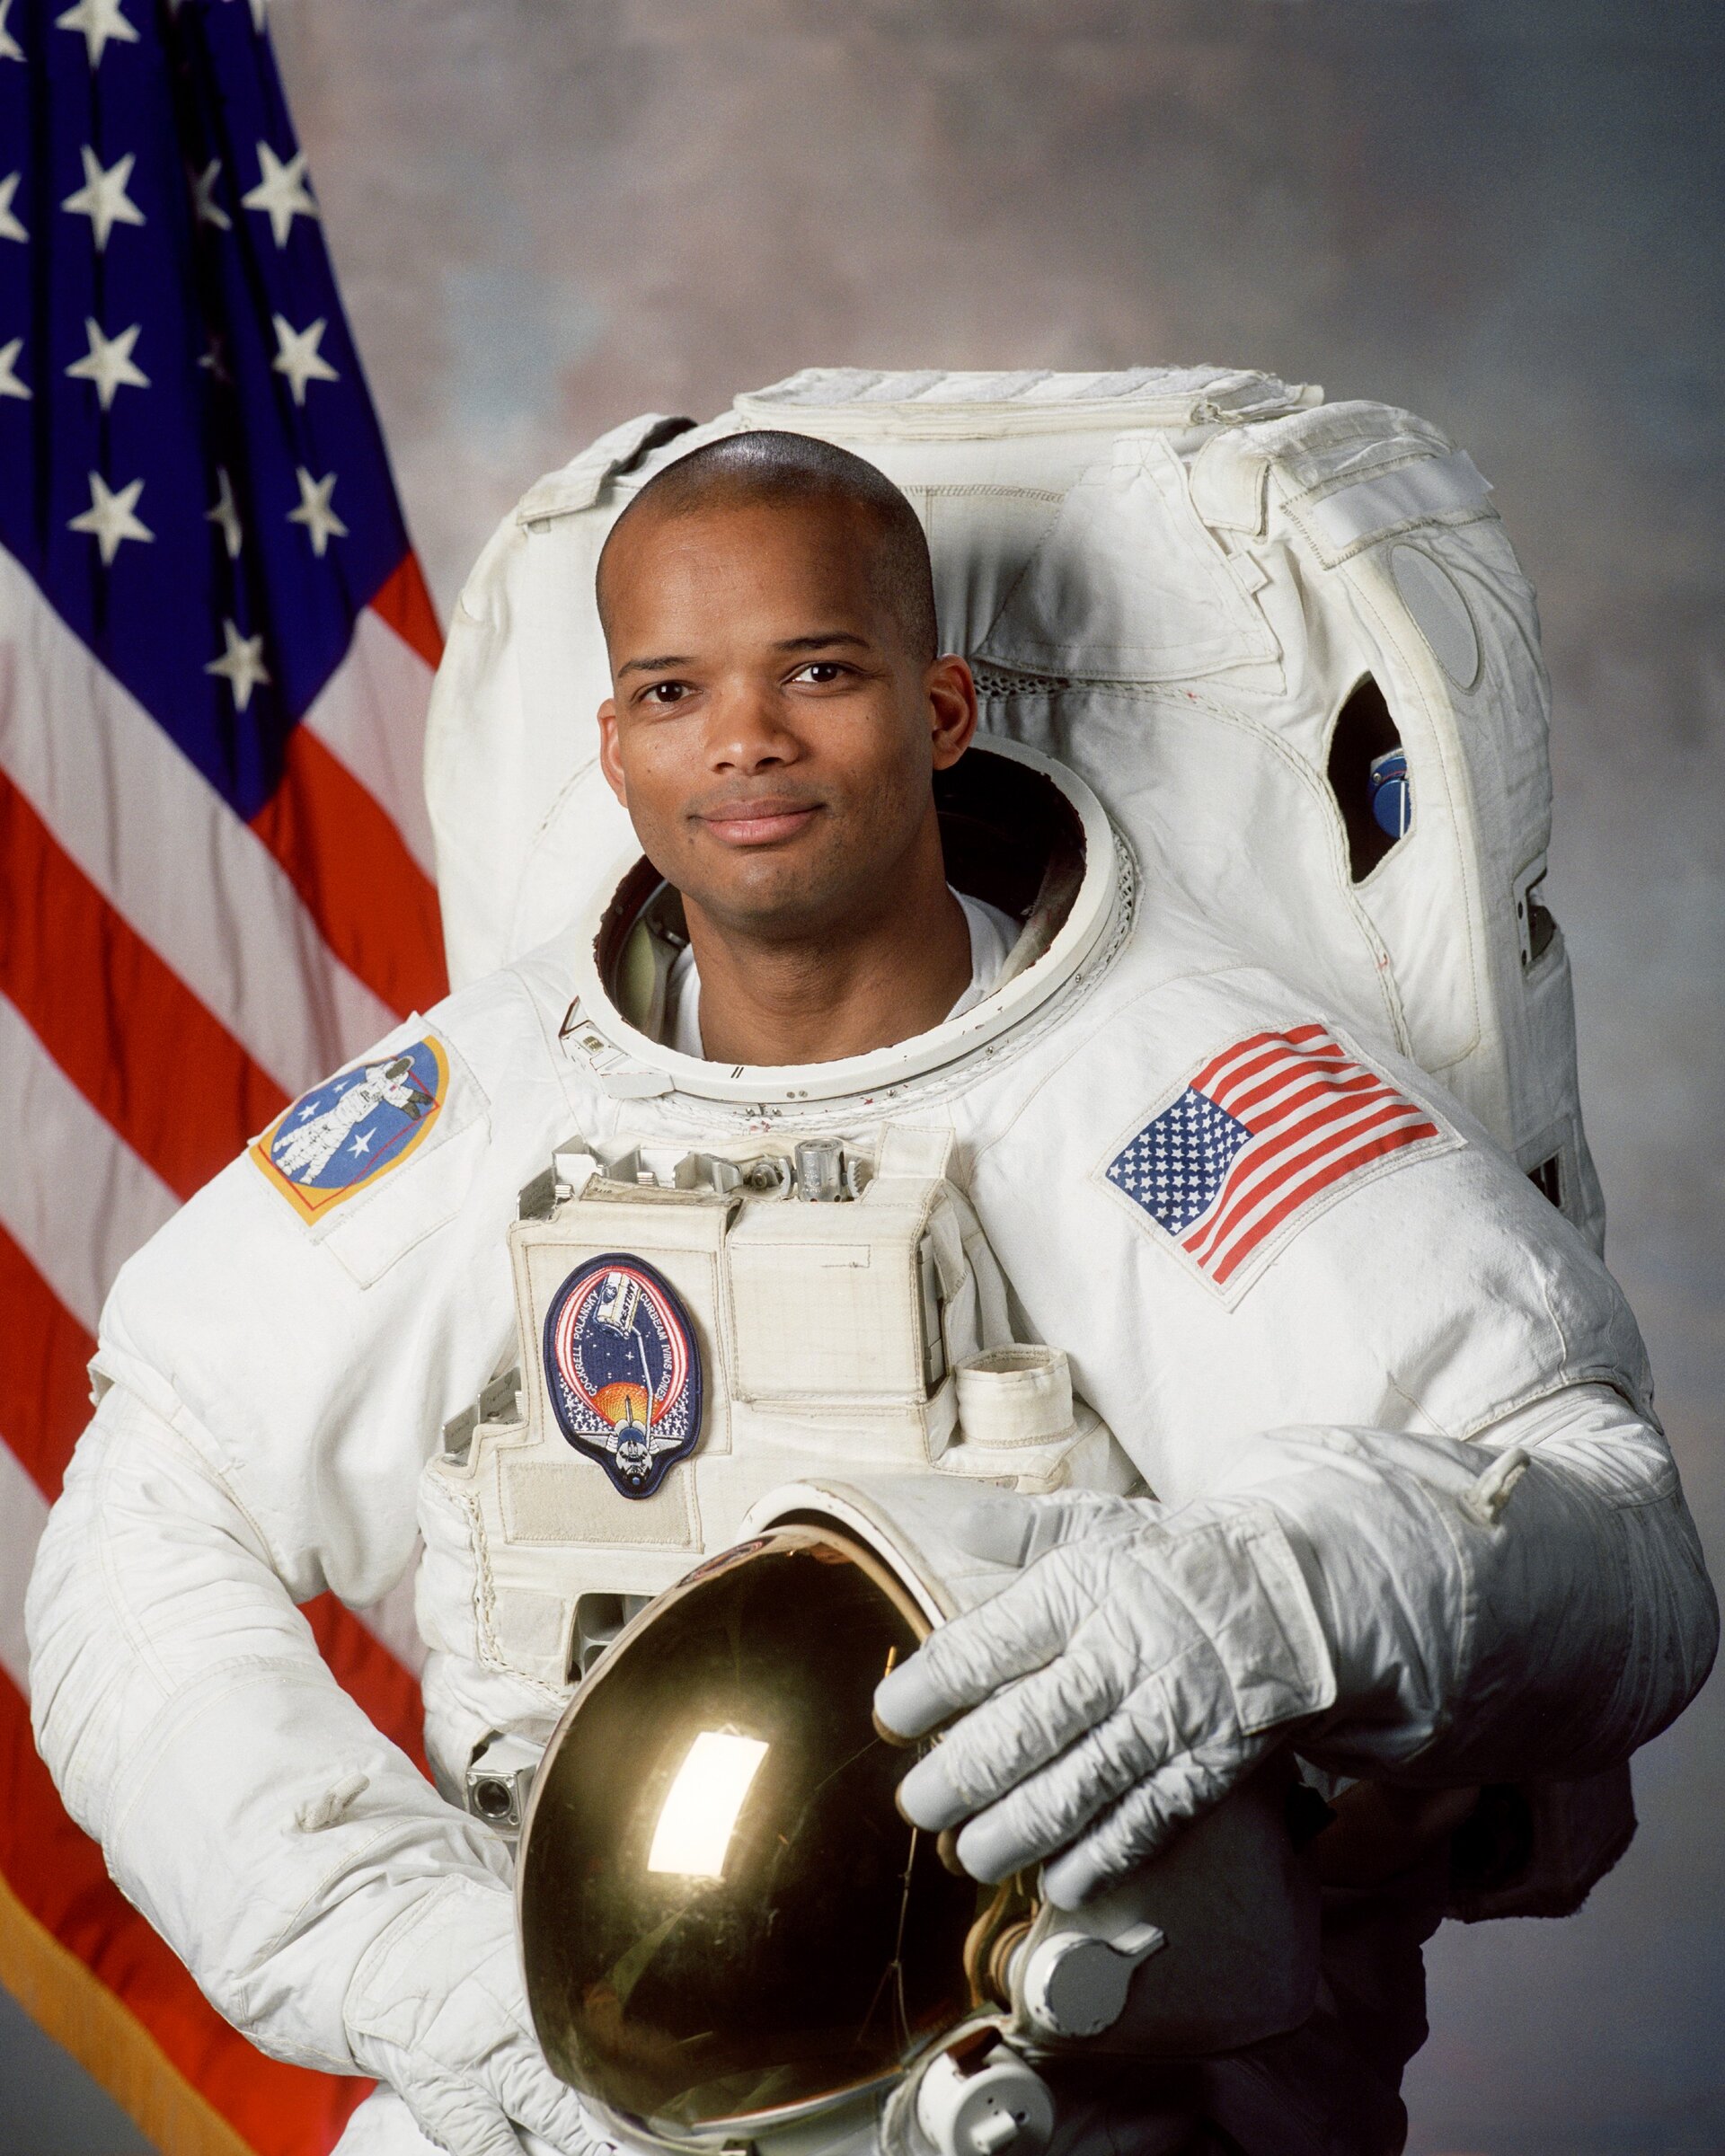 STS-116 Mission Specialist Robert Curbeam